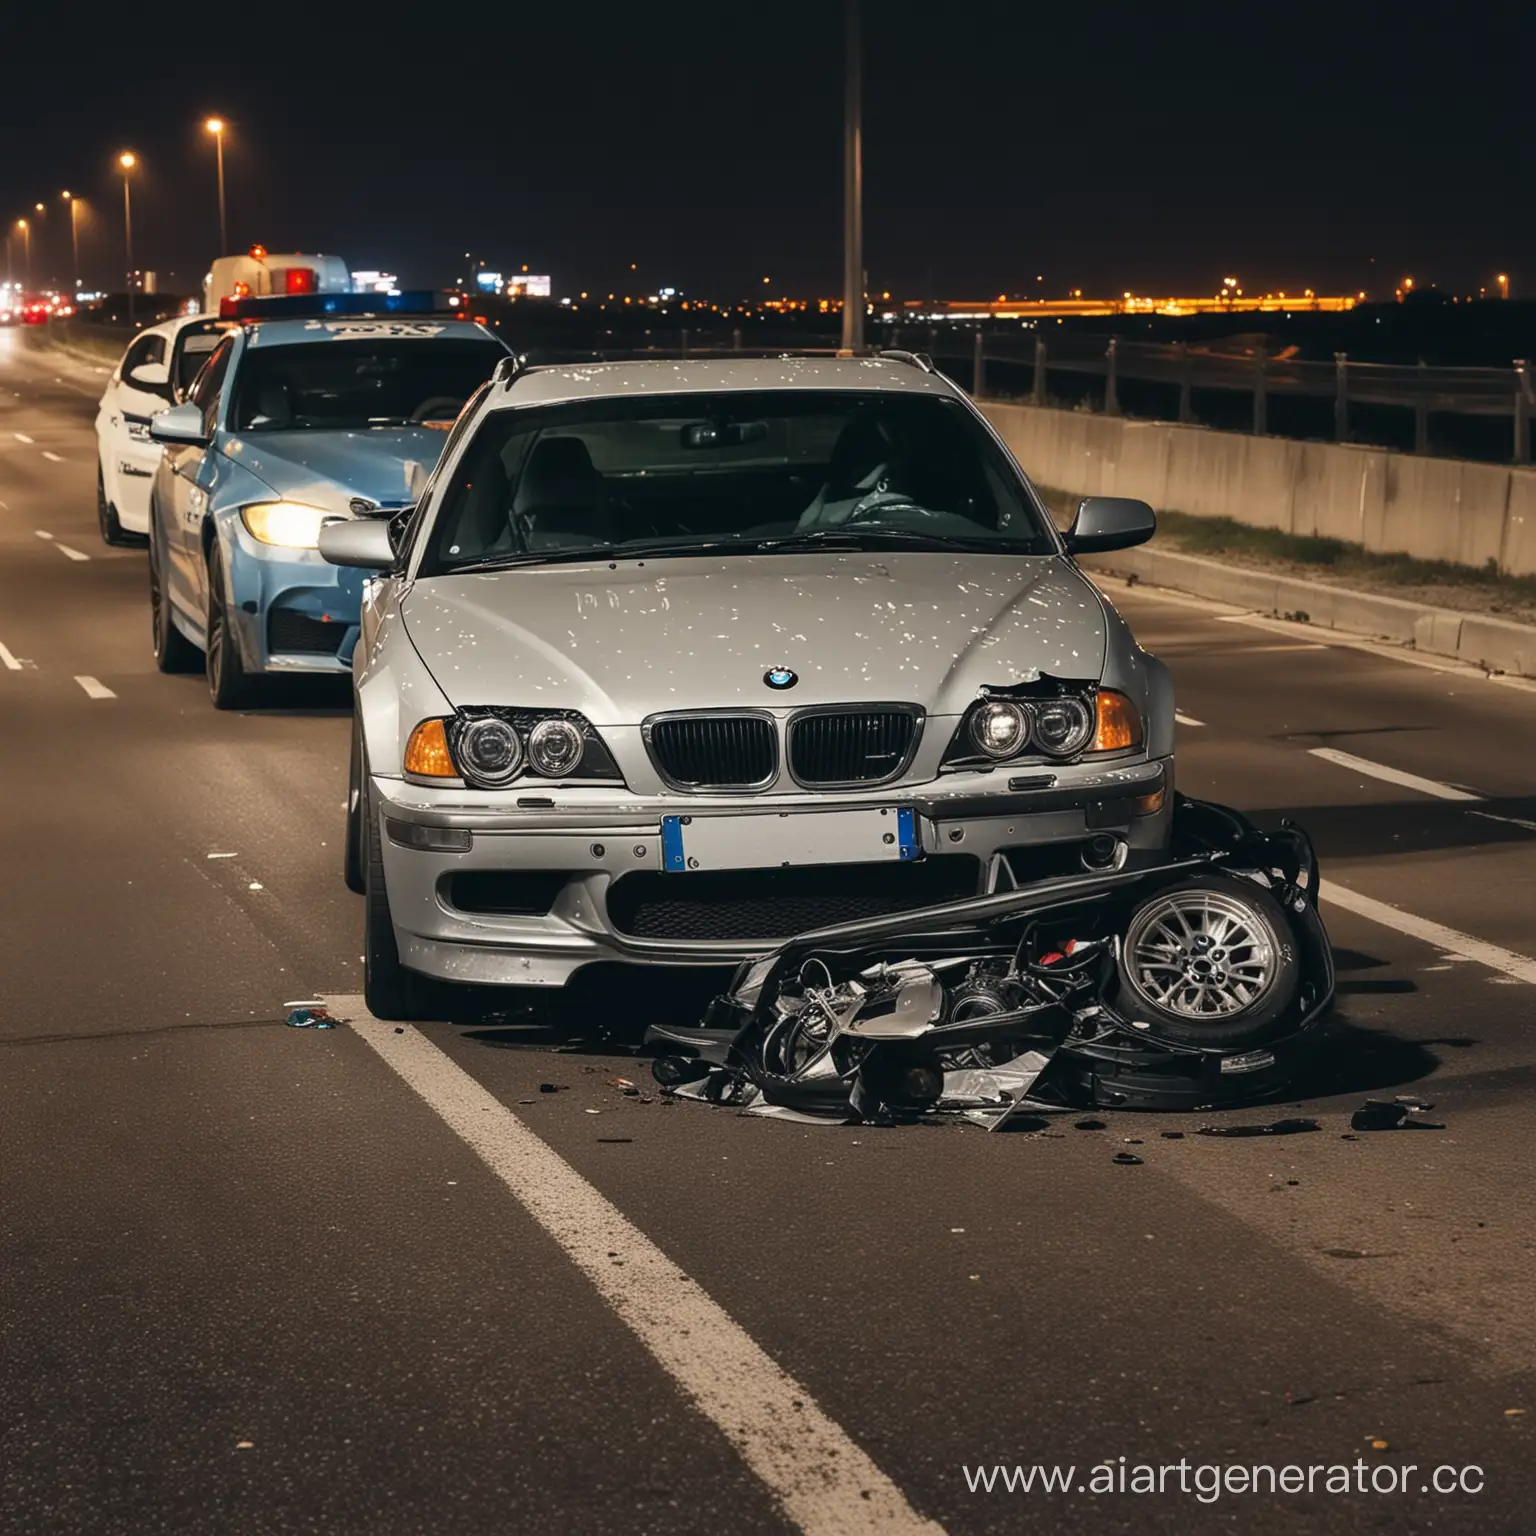 Nighttime-Highway-Scene-Broken-BMW-Coupe-with-Police-Crew